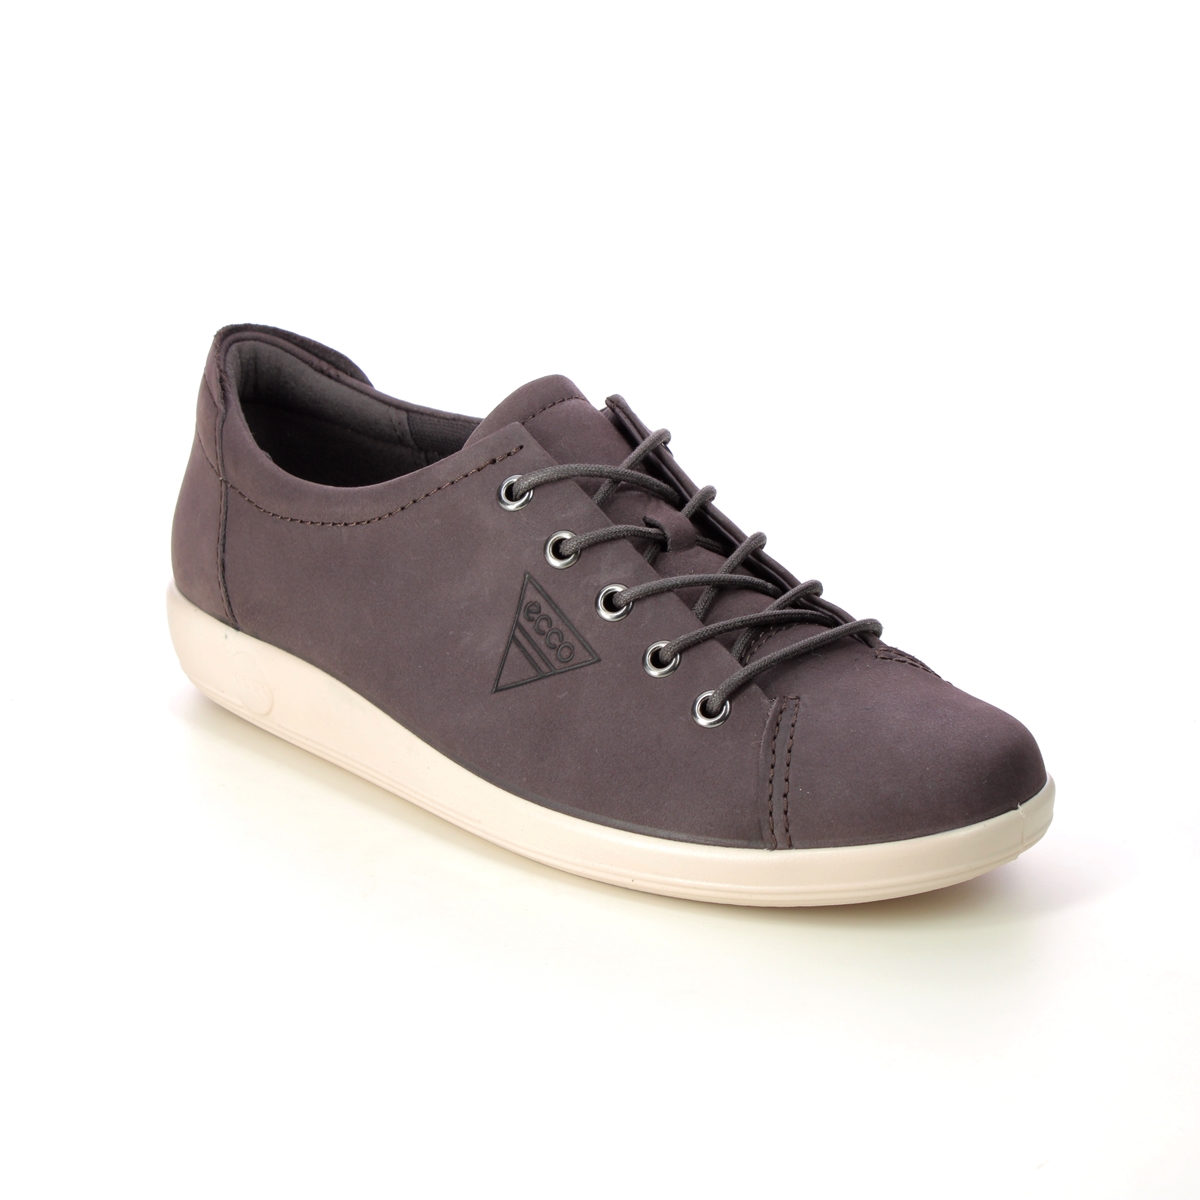 ECCO Soft 2.0 Dark grey nubuck Womens lacing shoes 206503-12576 in a Plain Nubuck Leather in Size 36